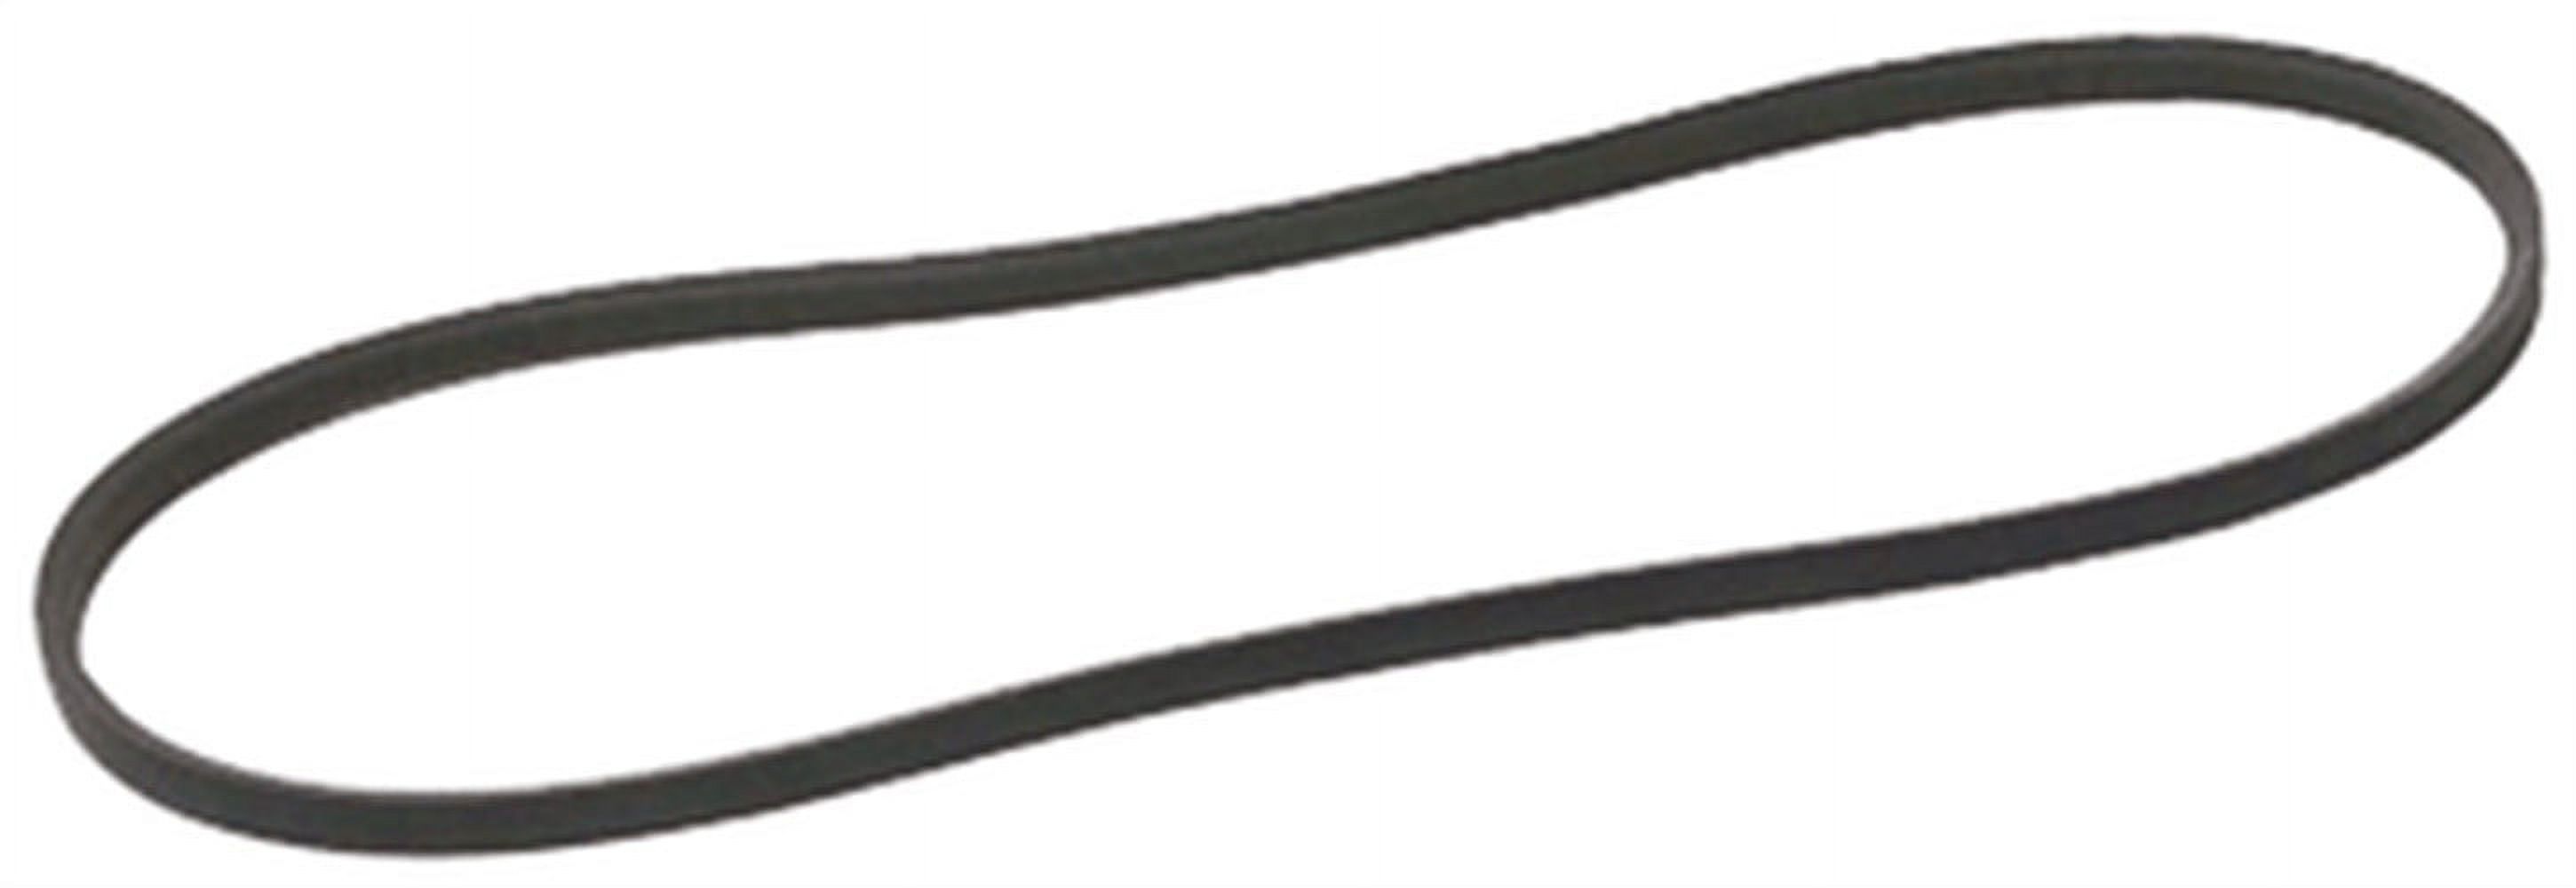 PIX X'SET A44/4L460 V-Belt, 4L, 46 in L, 1/2 in W, 5/16 in Thick, Black - image 2 of 2